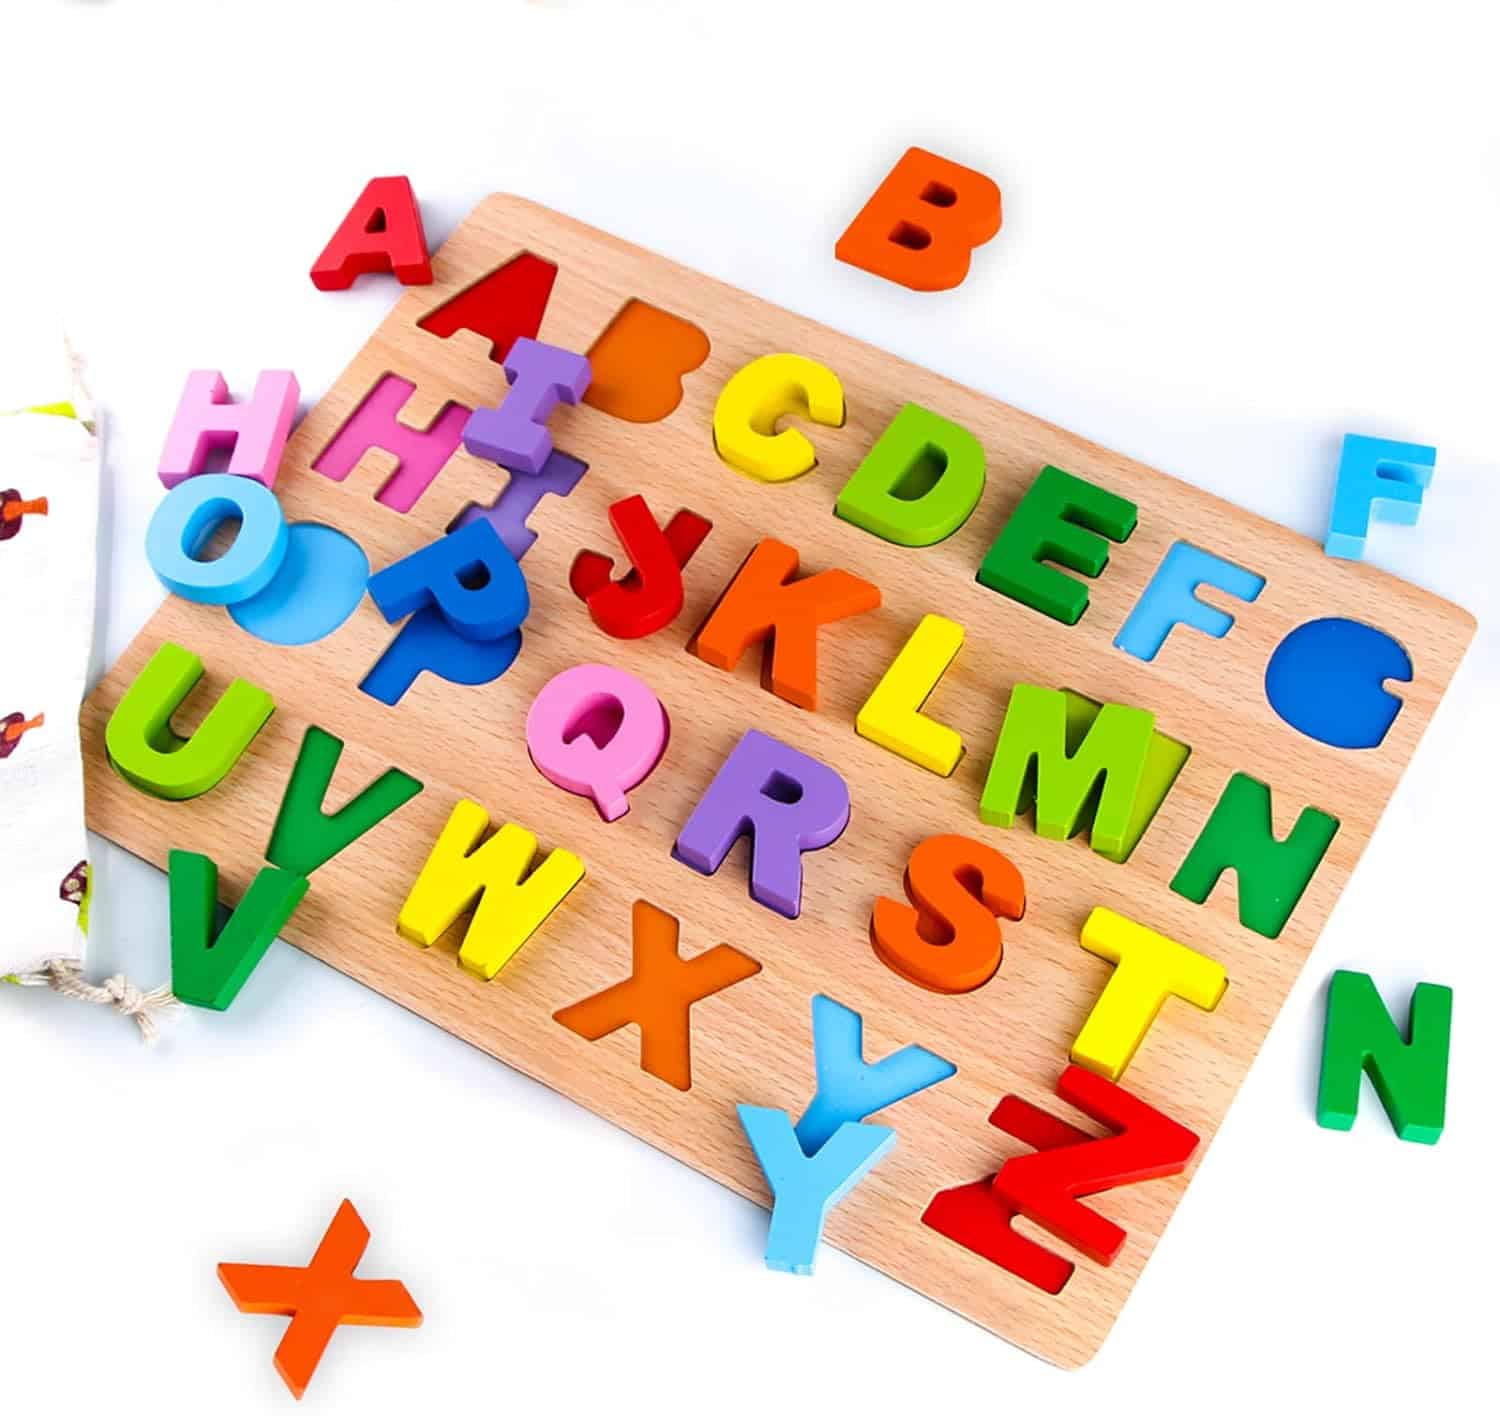 SKYFIELD Wooden Alphabet Puzzles, Letter Puzzles ABC Puzzles Early Educational Developmental Toy for 3, 4, 5, 6 Years Old Boys and Girls, for Toddlers, Kids, Preschoolers